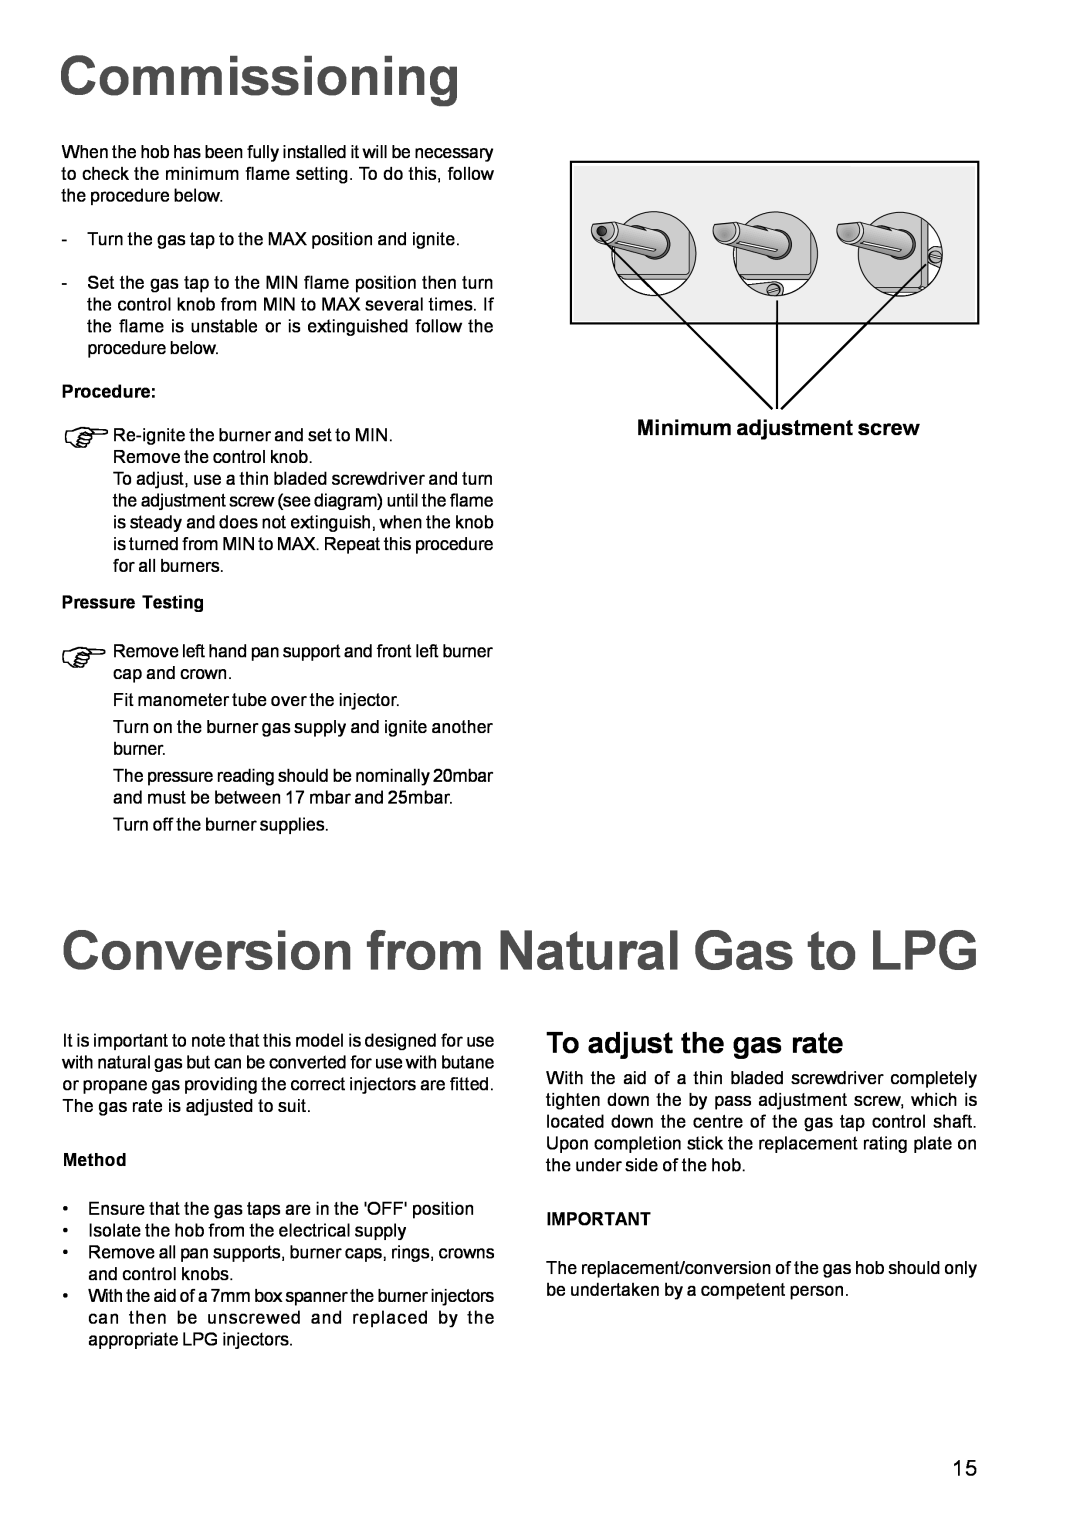 Zanussi GAS HOB manual Commissioning, Conversion from Natural Gas to LPG, To adjust the gas rate, Minimum adjustment screw 